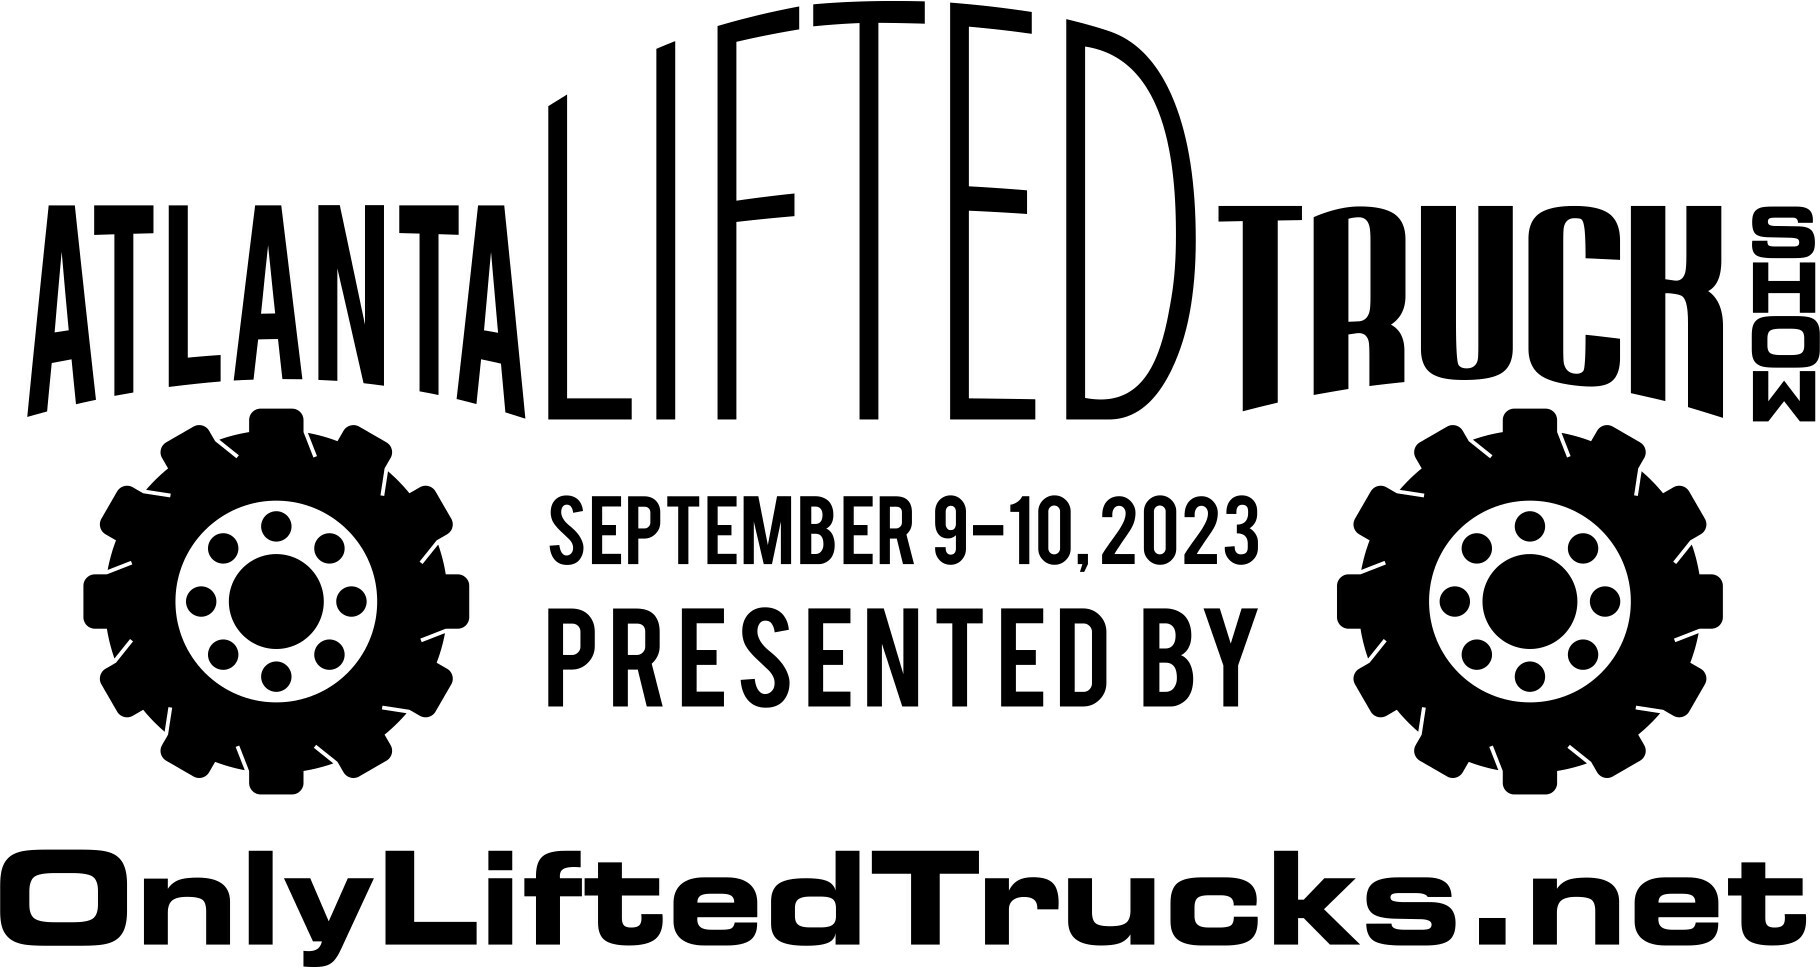 Online Marketplace Plans Lifted Truck Show | THE SHOP